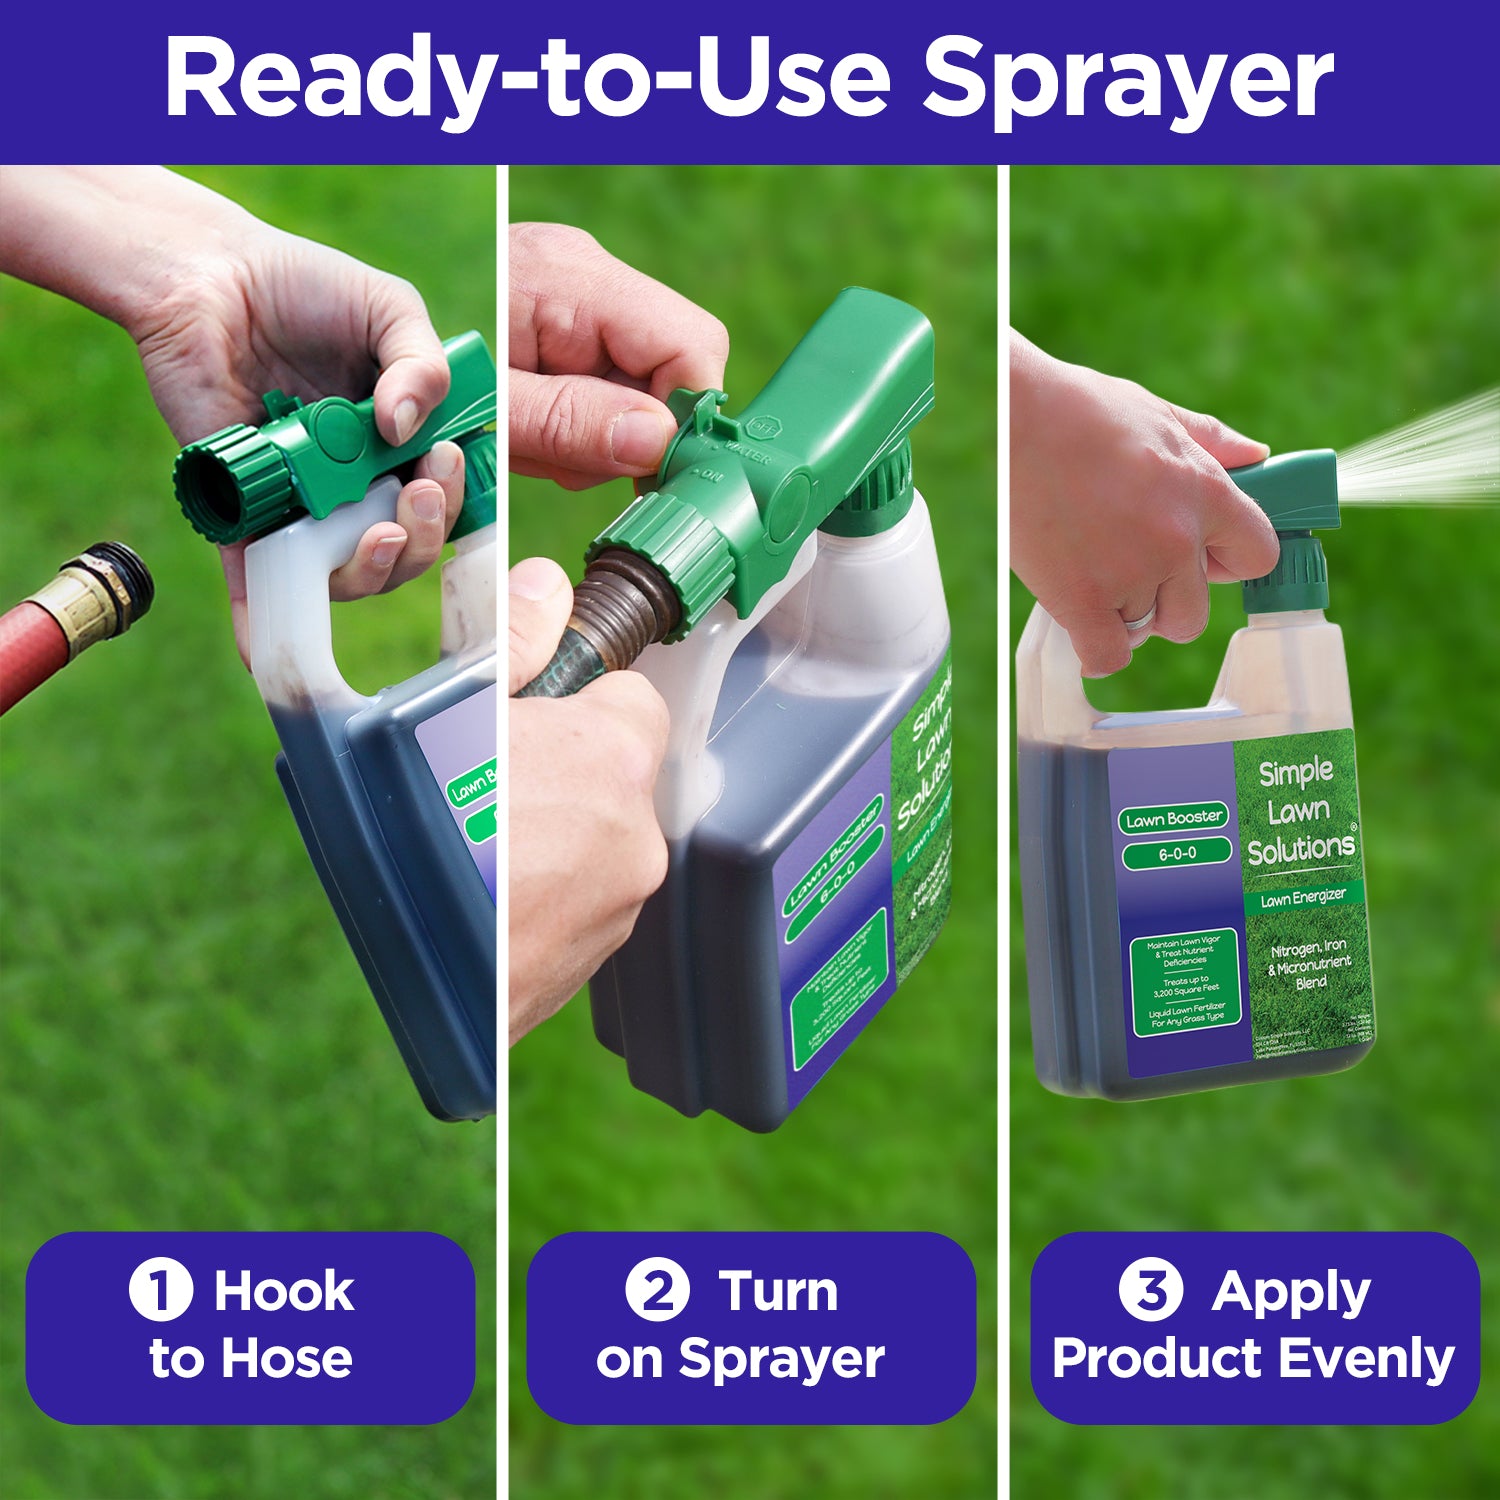 3 panel image displaying a person hooking up the hose-end fertilizer to hose, turning the sprayer on, and applying the liquid ready-to-use fertilizer